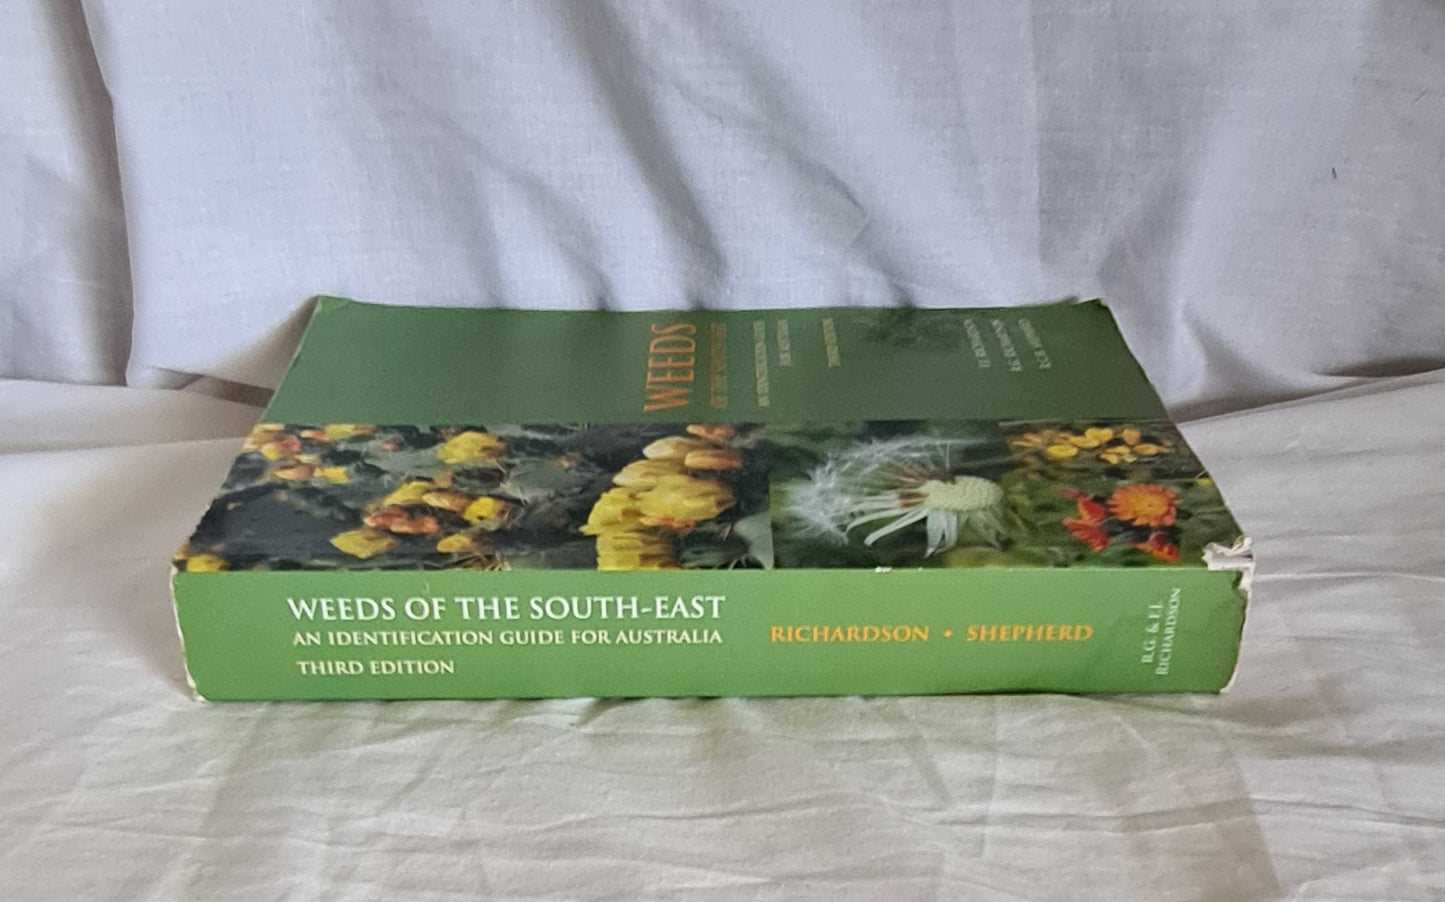 Weeds of the South-East by F. J. Richardson, R. G. Richardson and R. C. H. Shepherd